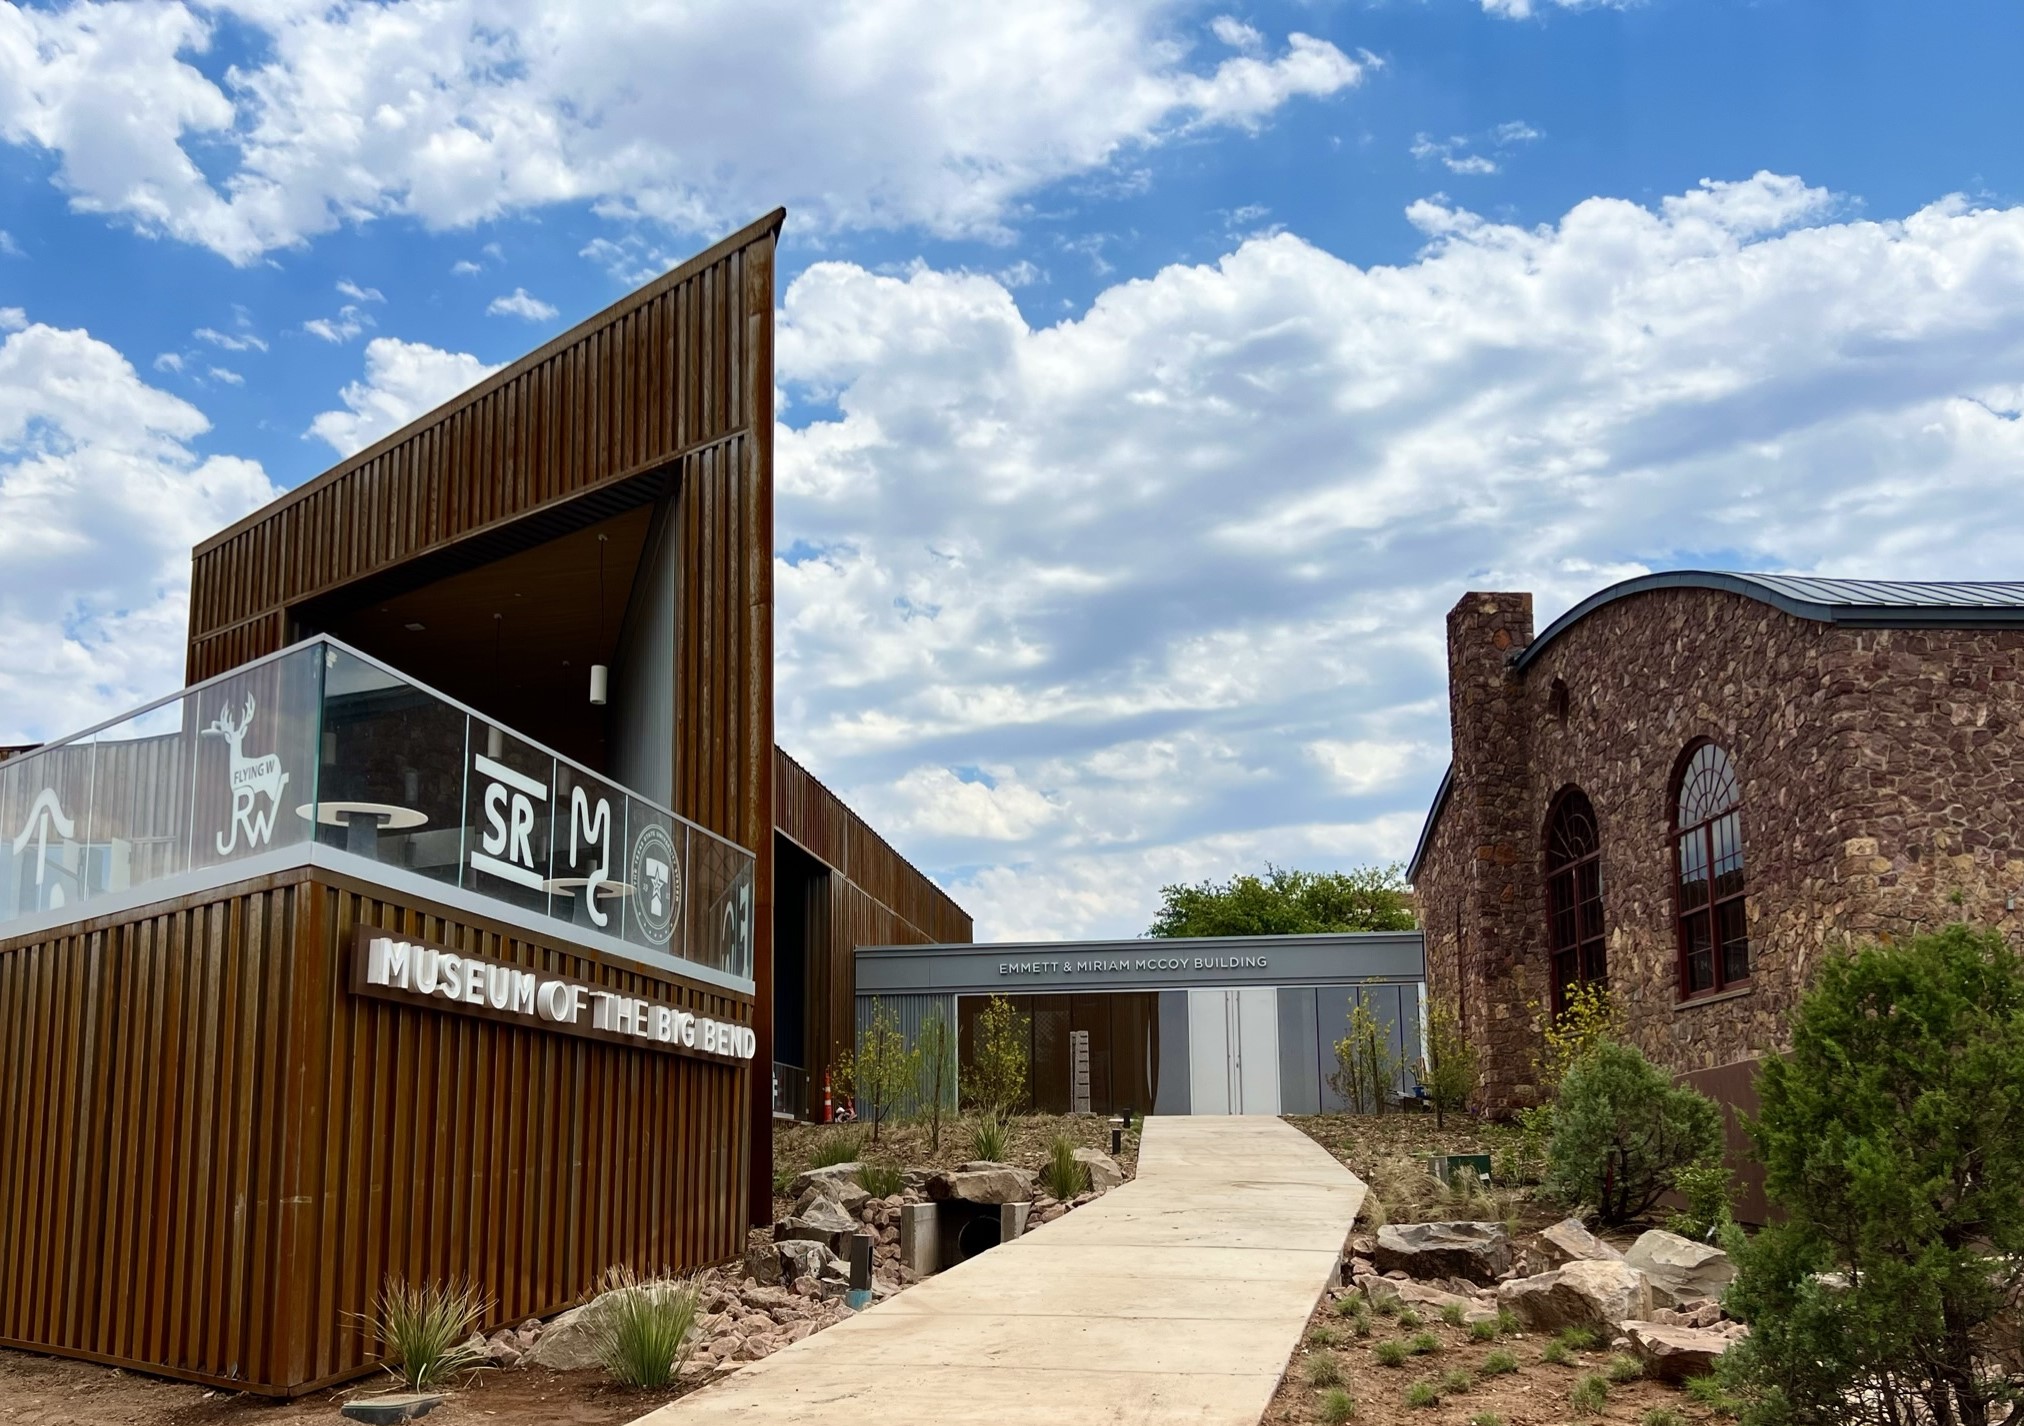 A large, brown modern building with a sign that reads "Museum of the Big Bend" with the sky in the background.